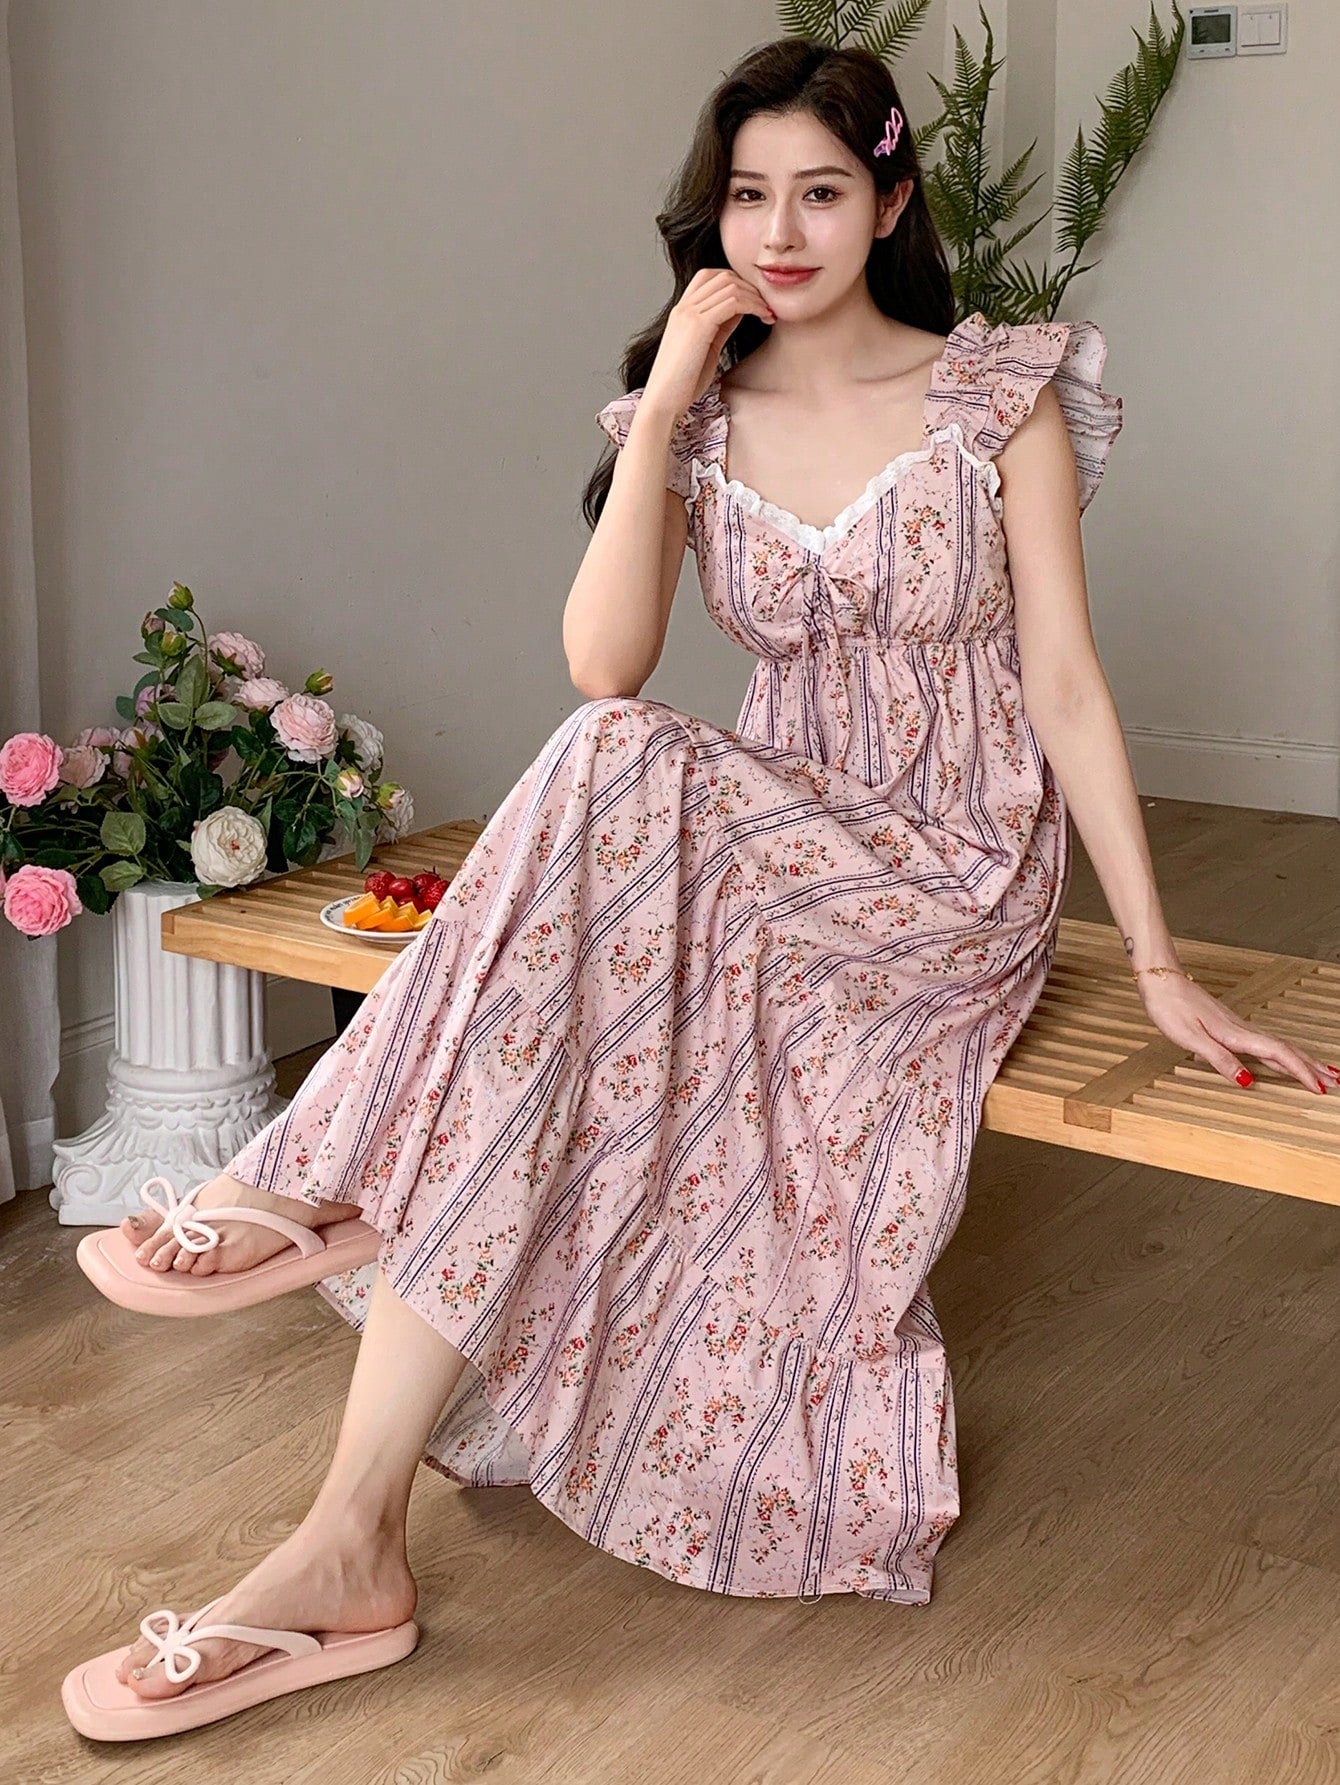 Women Romantic Floral Striped Dress With Ruffled Hem And Tie Waist